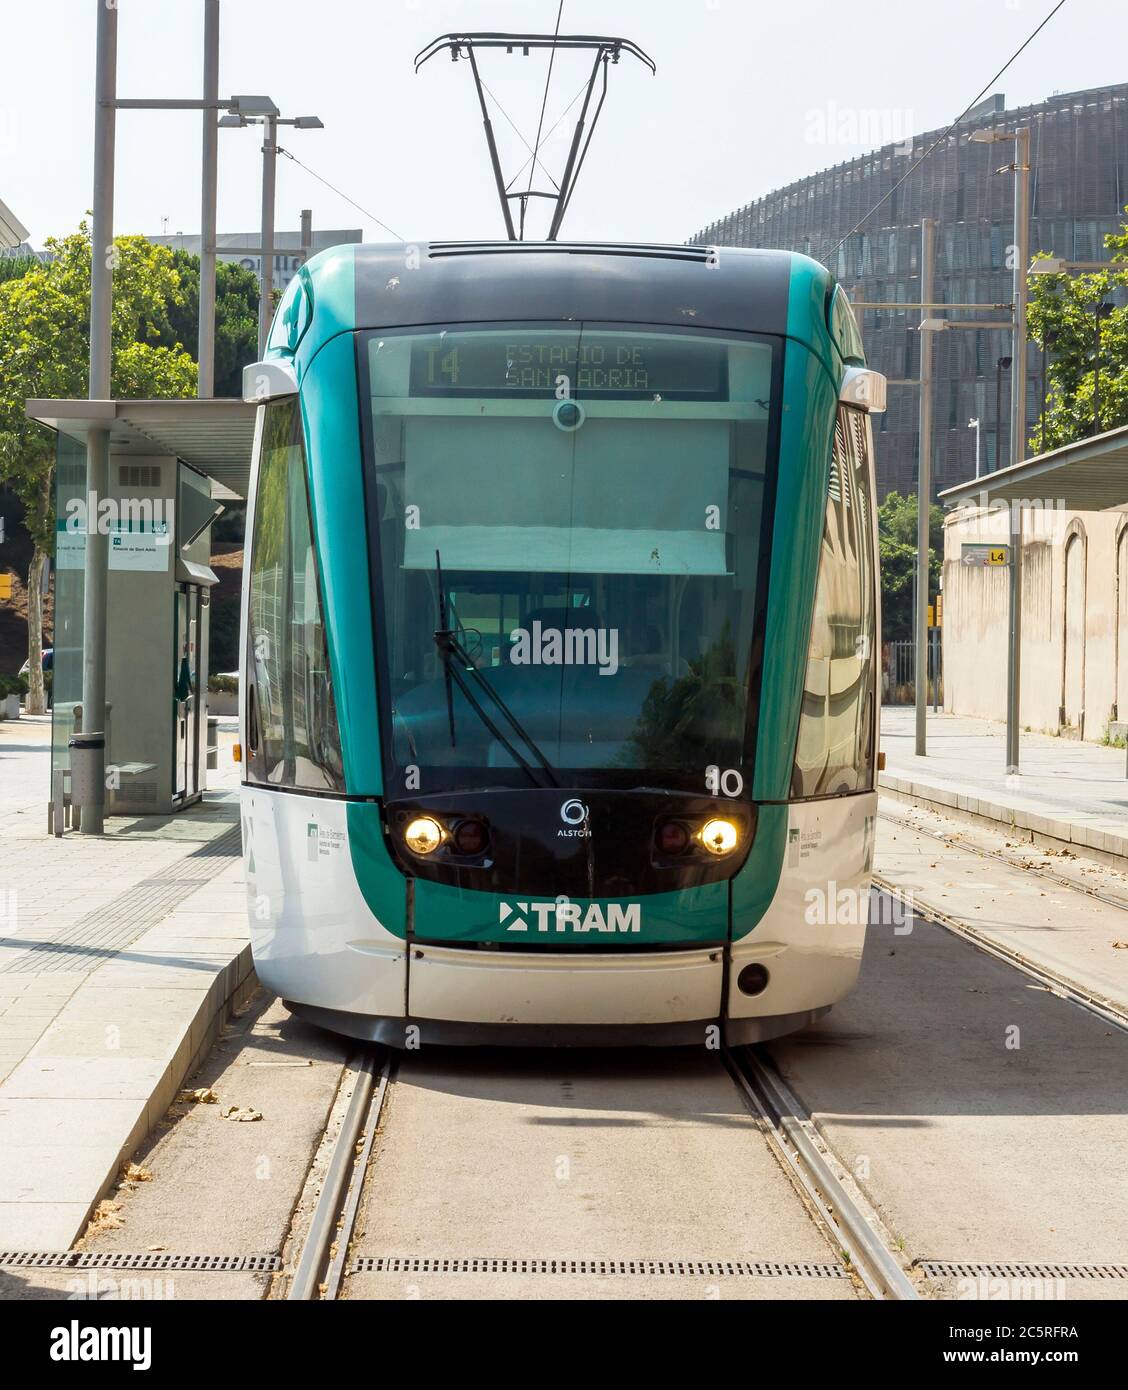 BARCELONA, SPAIN - JULY 12, 2015: Barcelona tram known as Trambaix. The tram is going through the Diagonal avenue.  Barcelona, Spain - July 12, 2015: Stock Photo